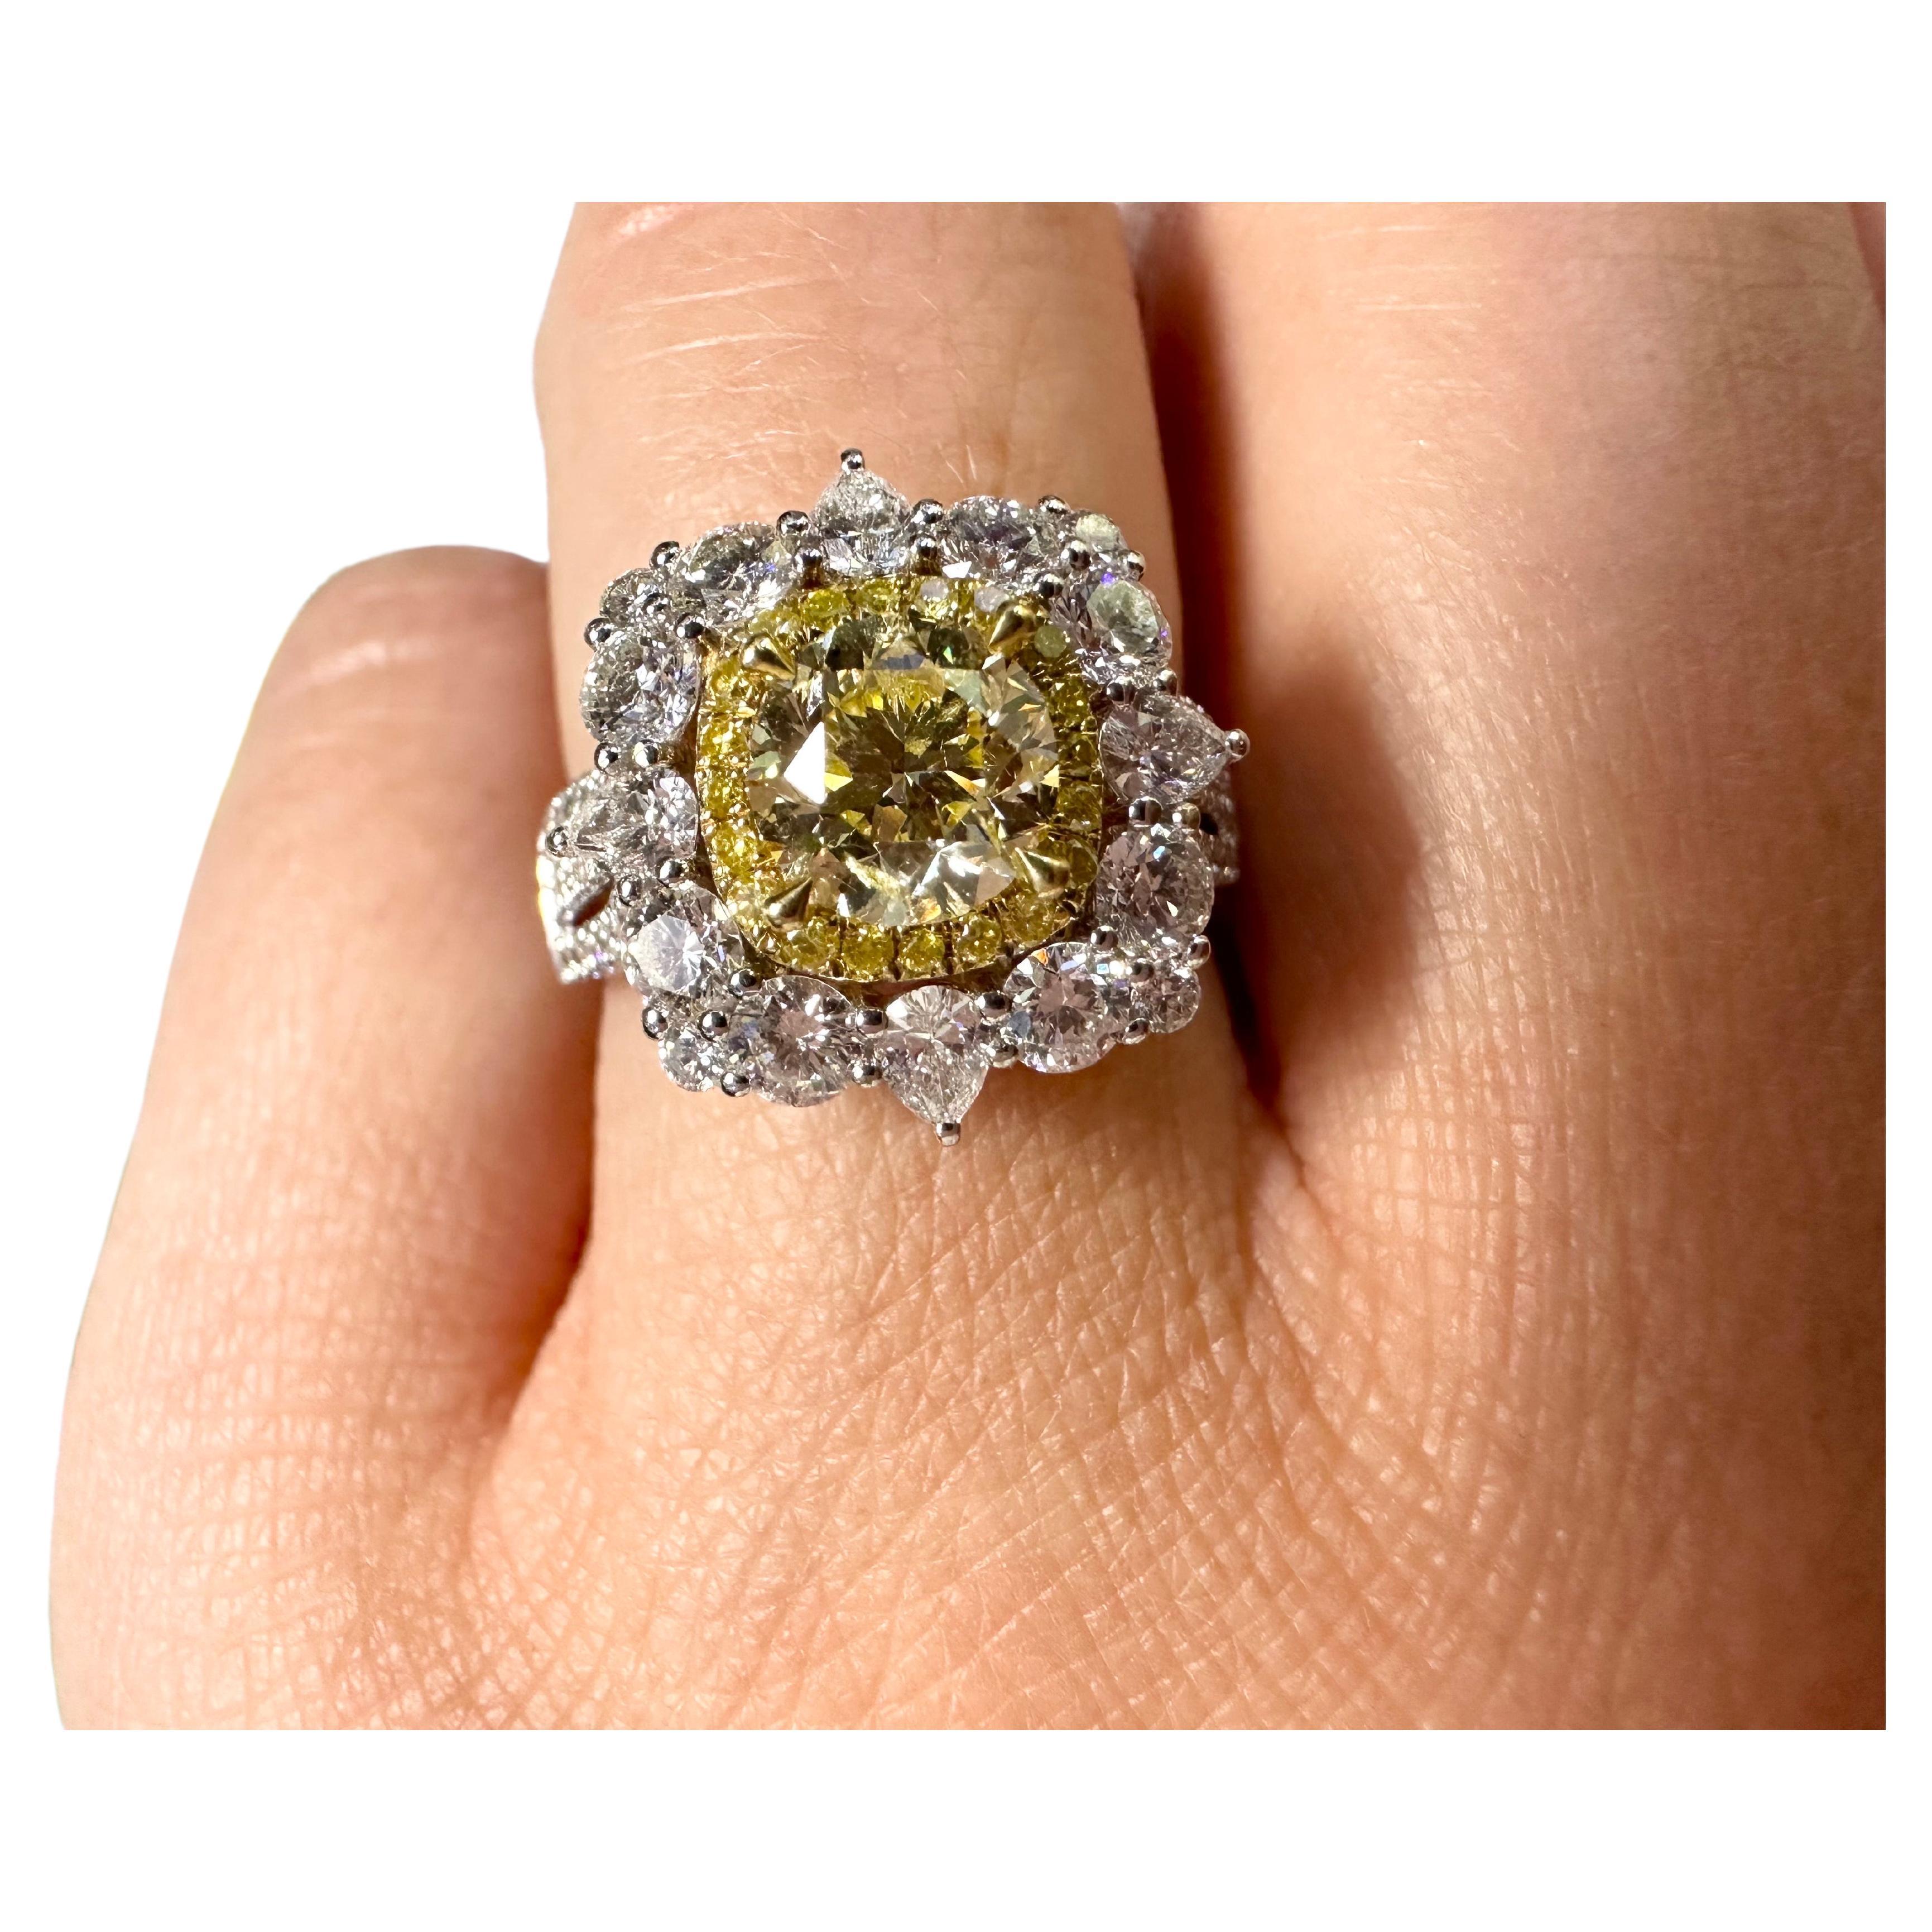 Yellow diamond engagement ring 1ct GIA certified diamond For Sale